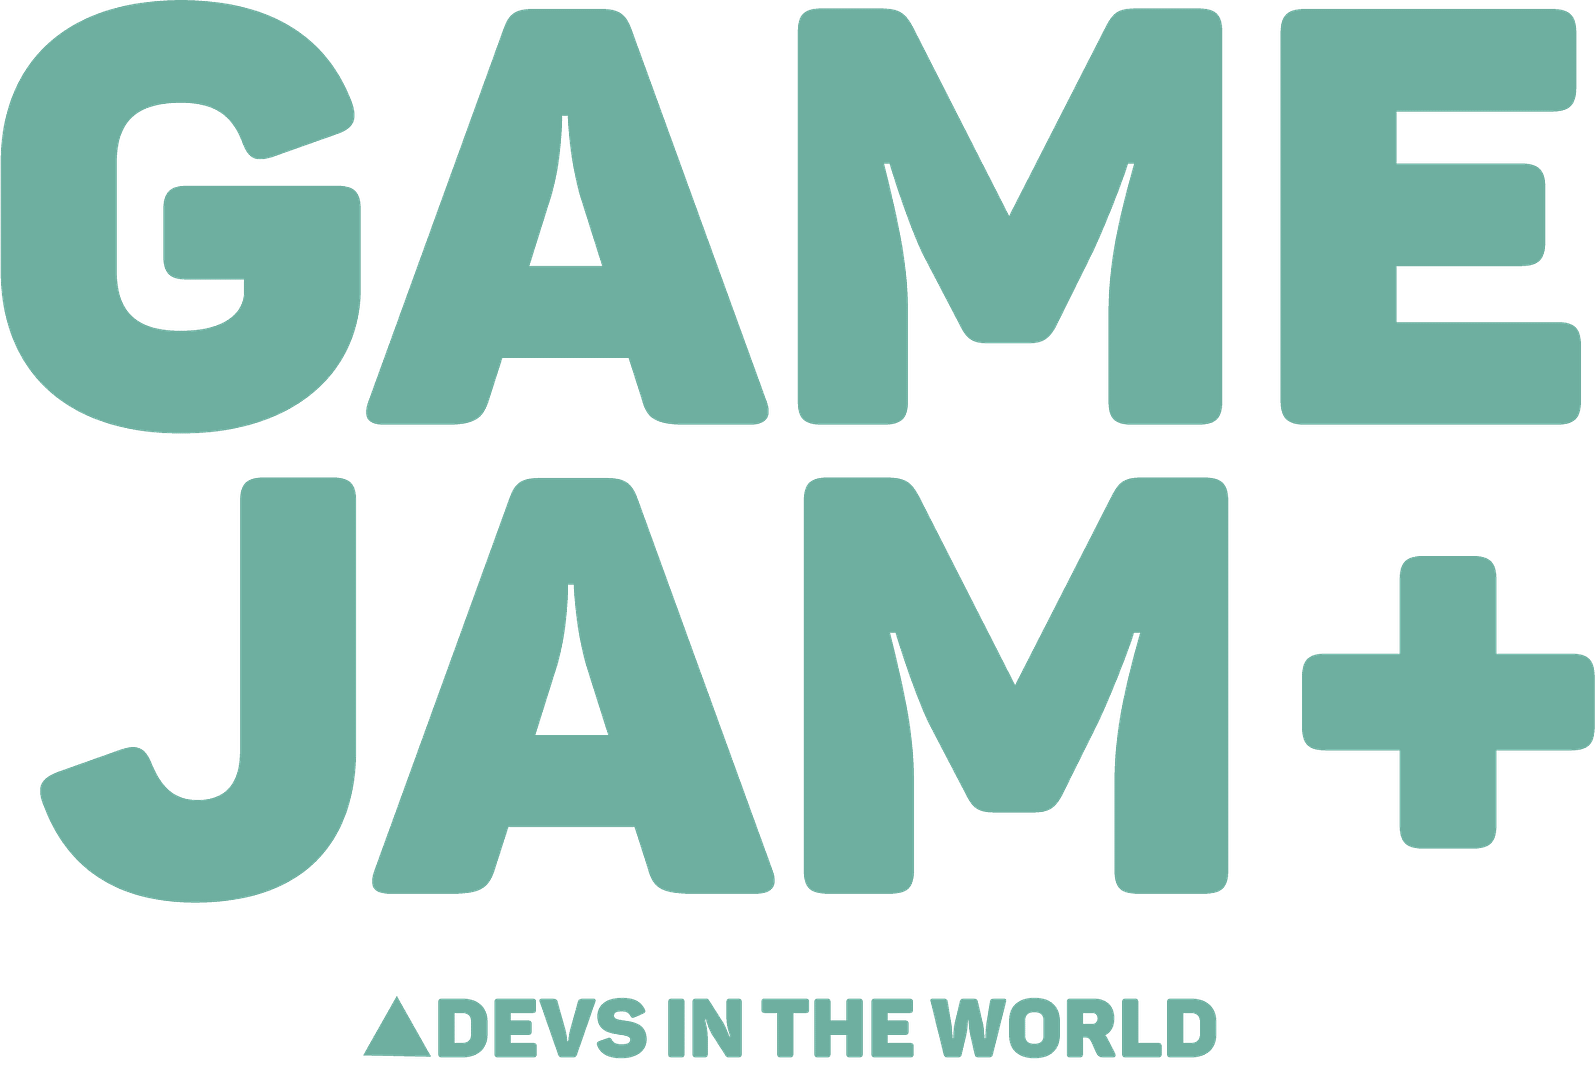 You are currently viewing GameJam+, the Game Development World Cup, Welcome Clube de Regatas do Flamengo and Apex-Brasil as Newest Partners